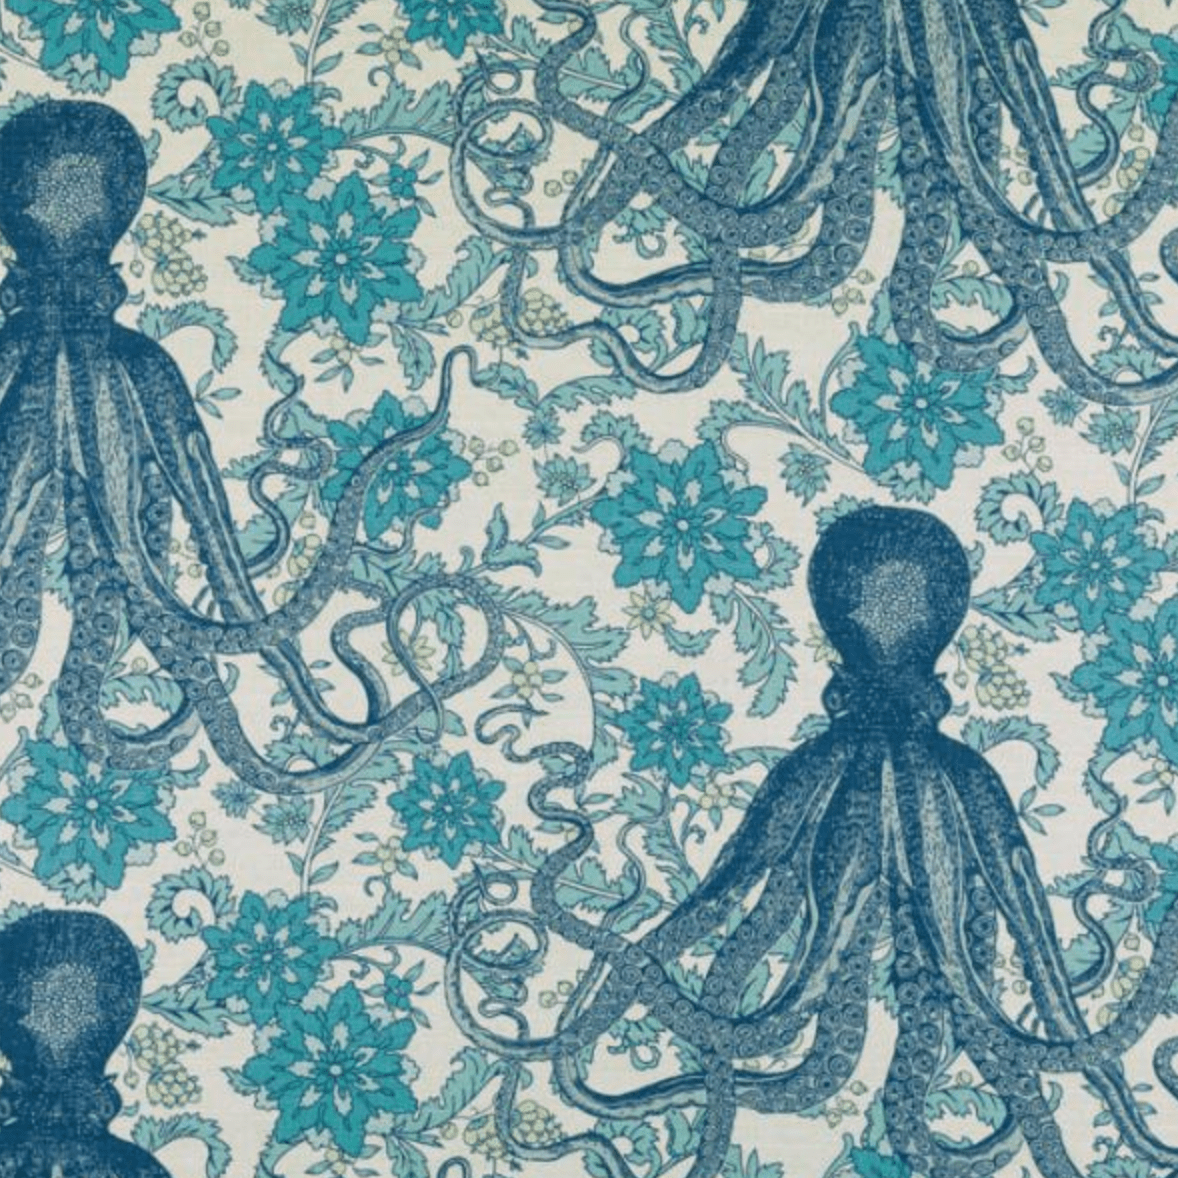 Blue and white linen fabric with octopus.